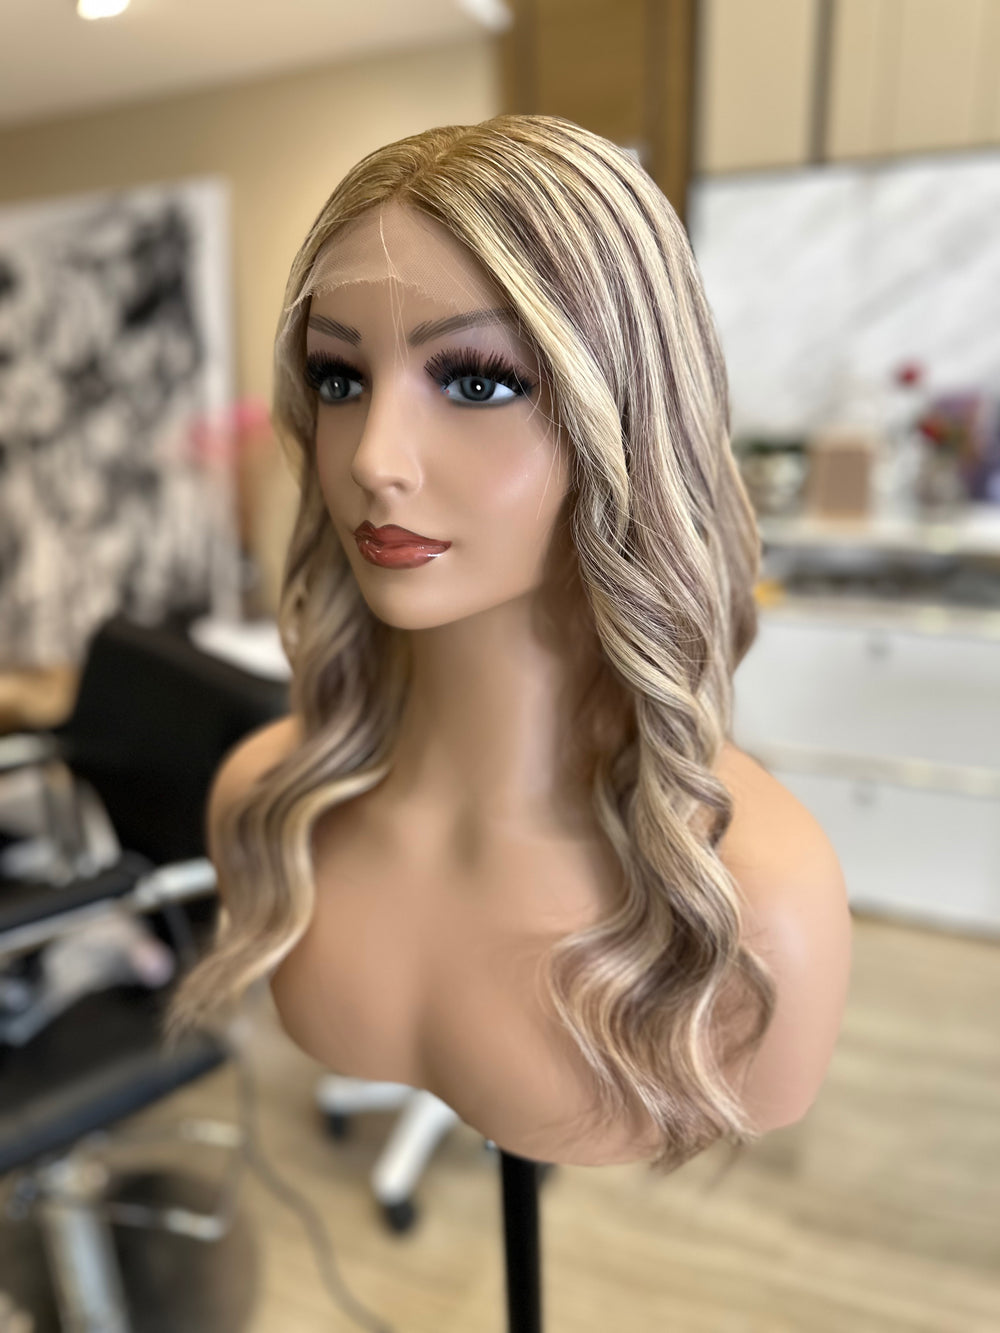 Avis | Remy Human Hair Wig- Light Shade of Blonde With Darker Tones